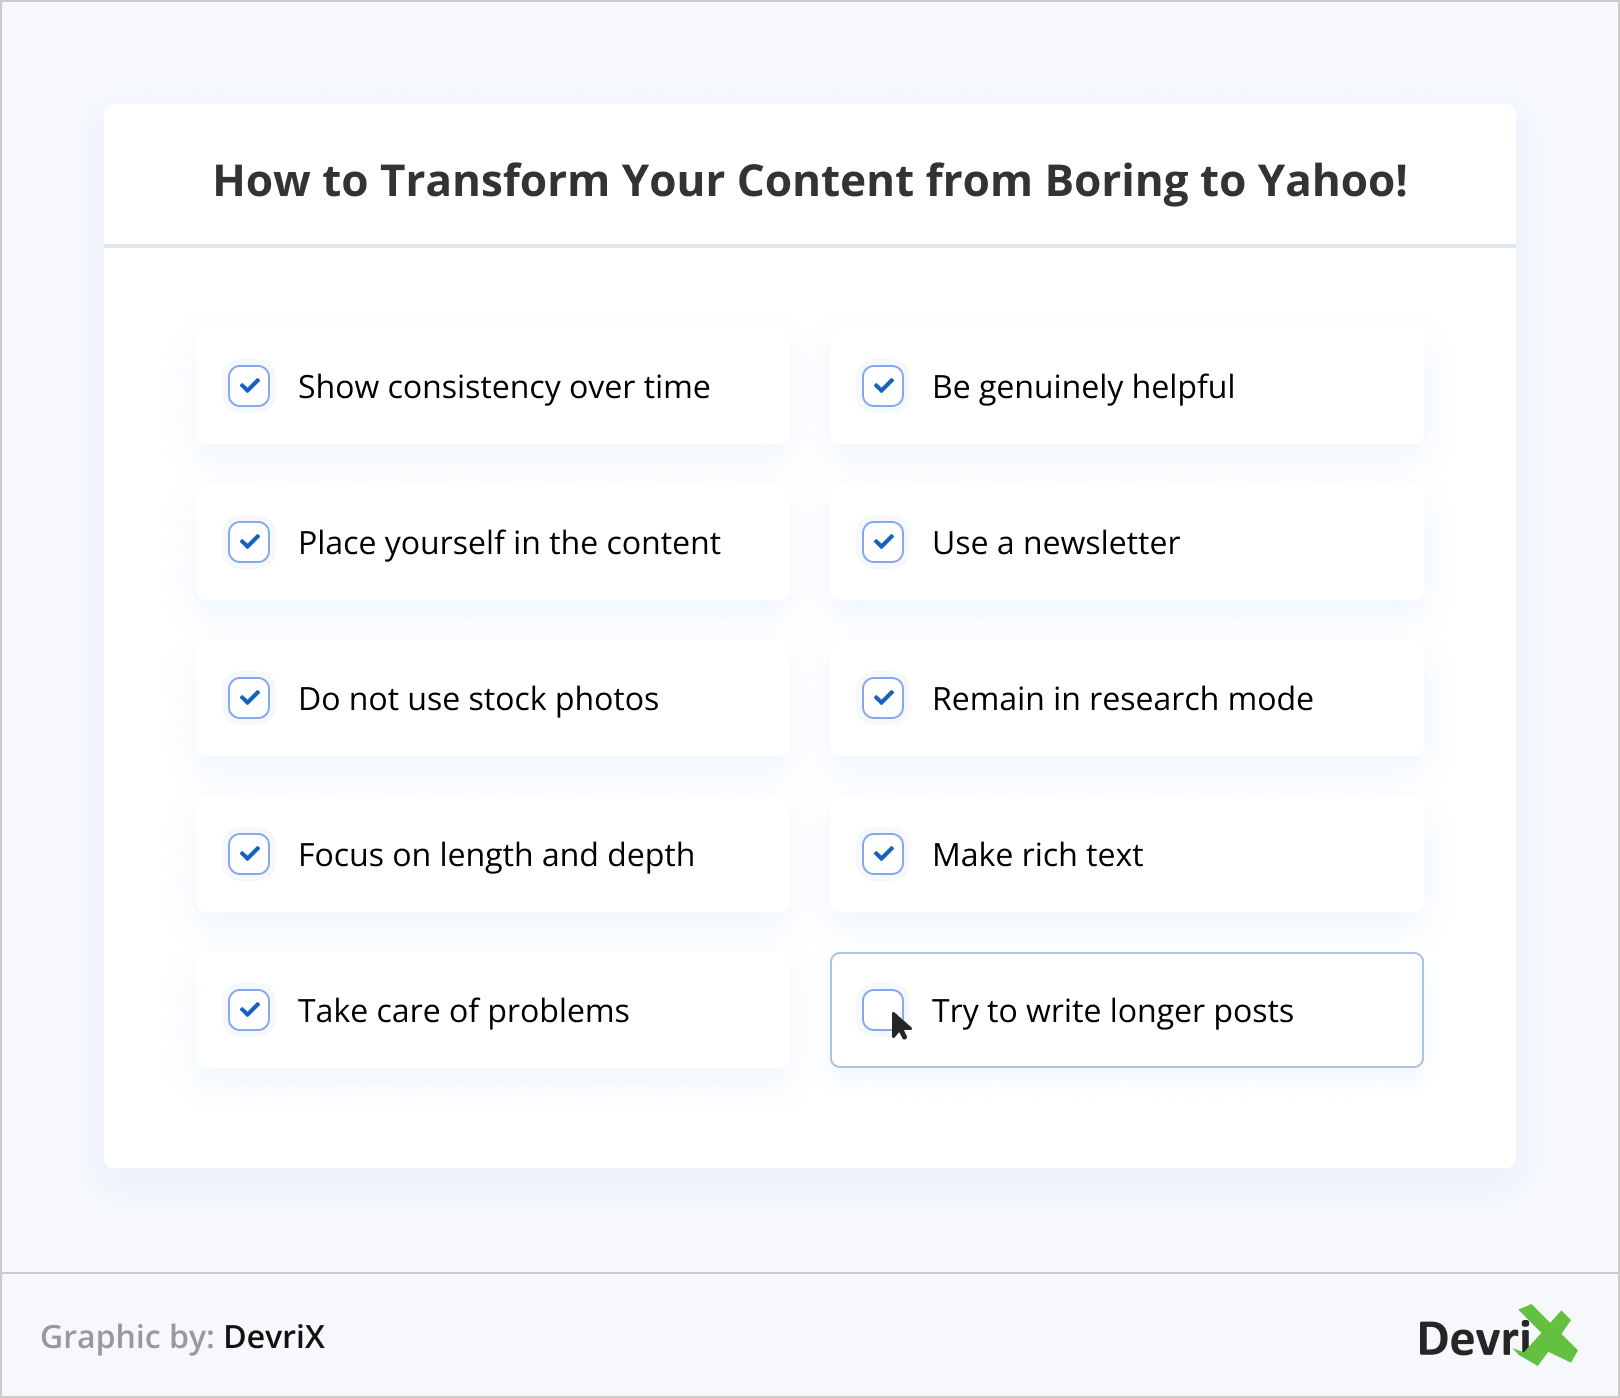 How to Transform Your Content from Boring to Yahoo